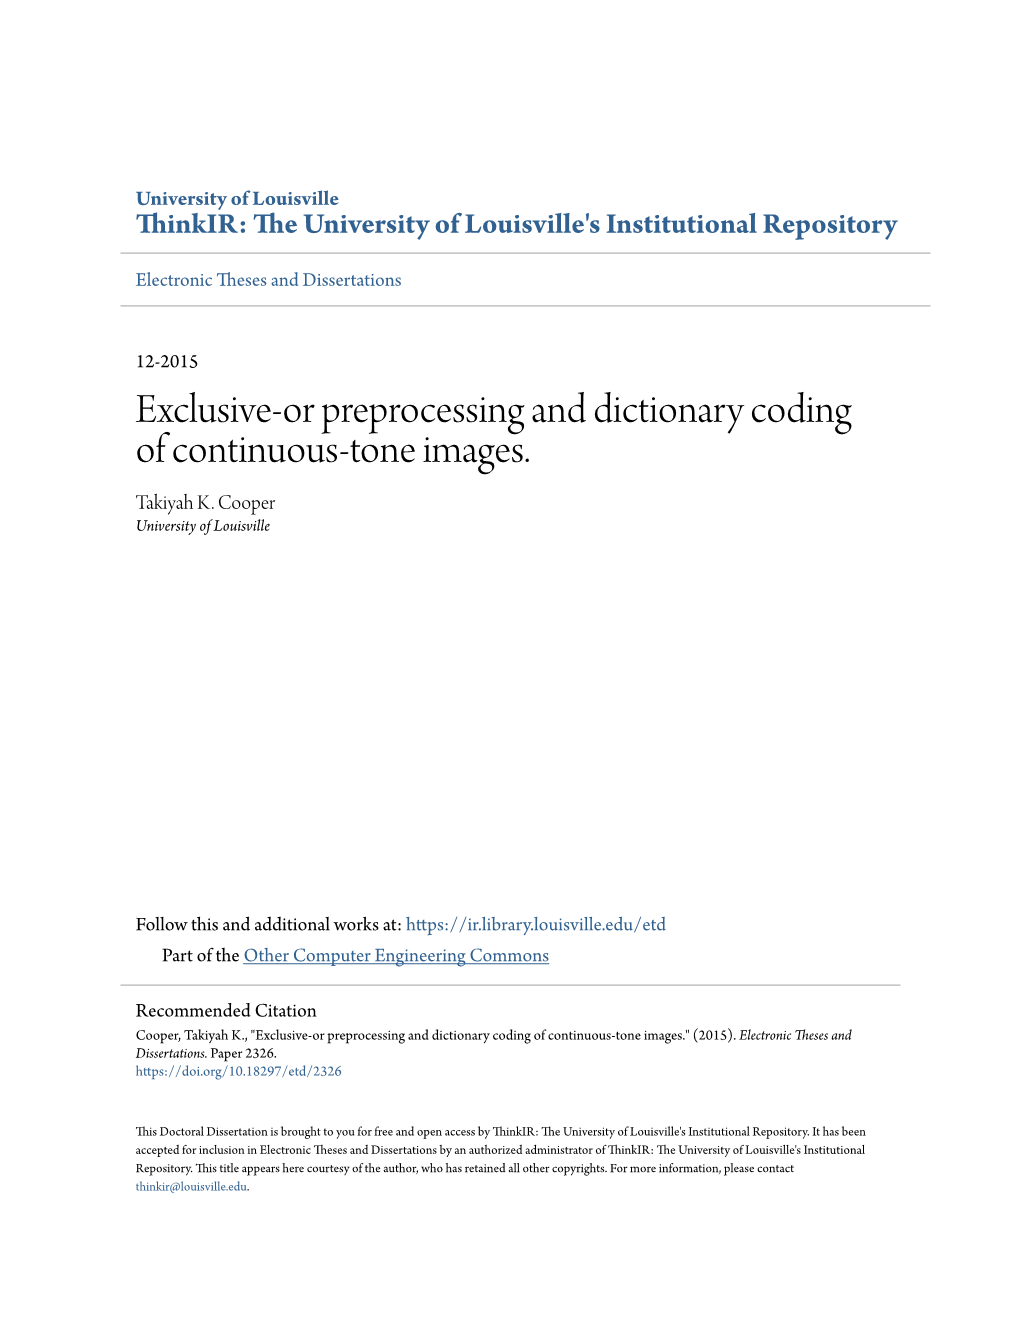 Exclusive-Or Preprocessing and Dictionary Coding of Continuous-Tone Images